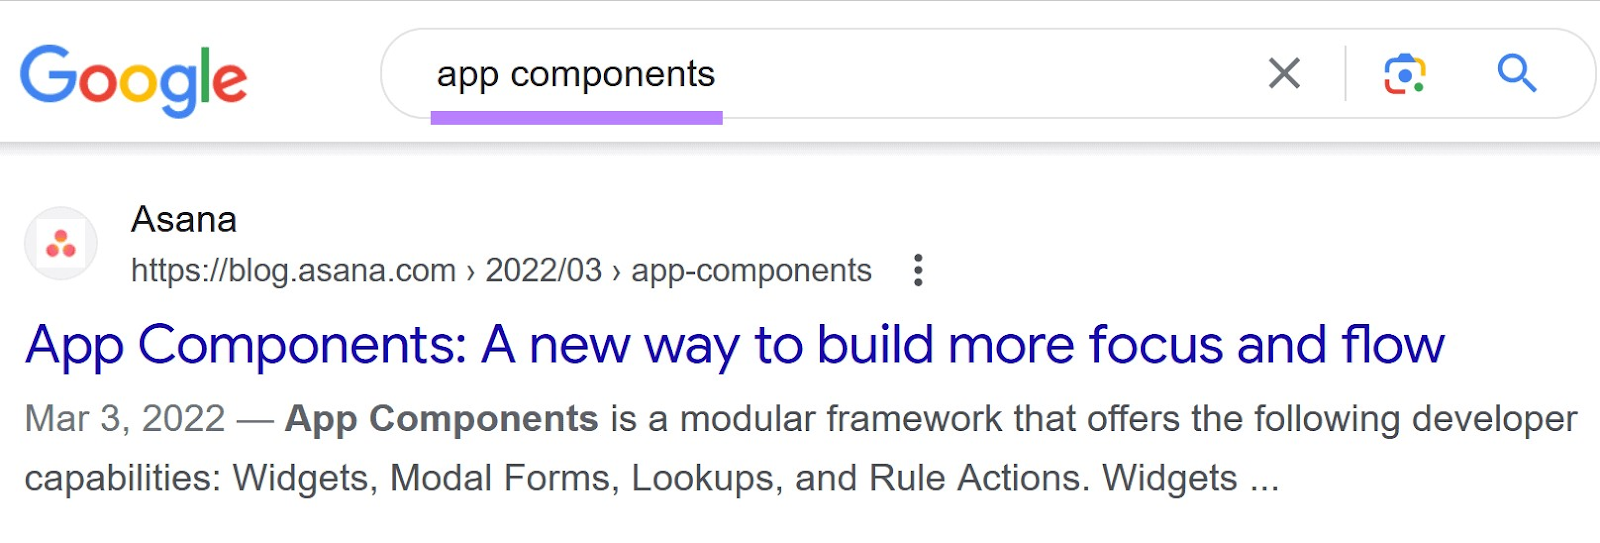 Asana's App Components results on Google SERP for "app components" query